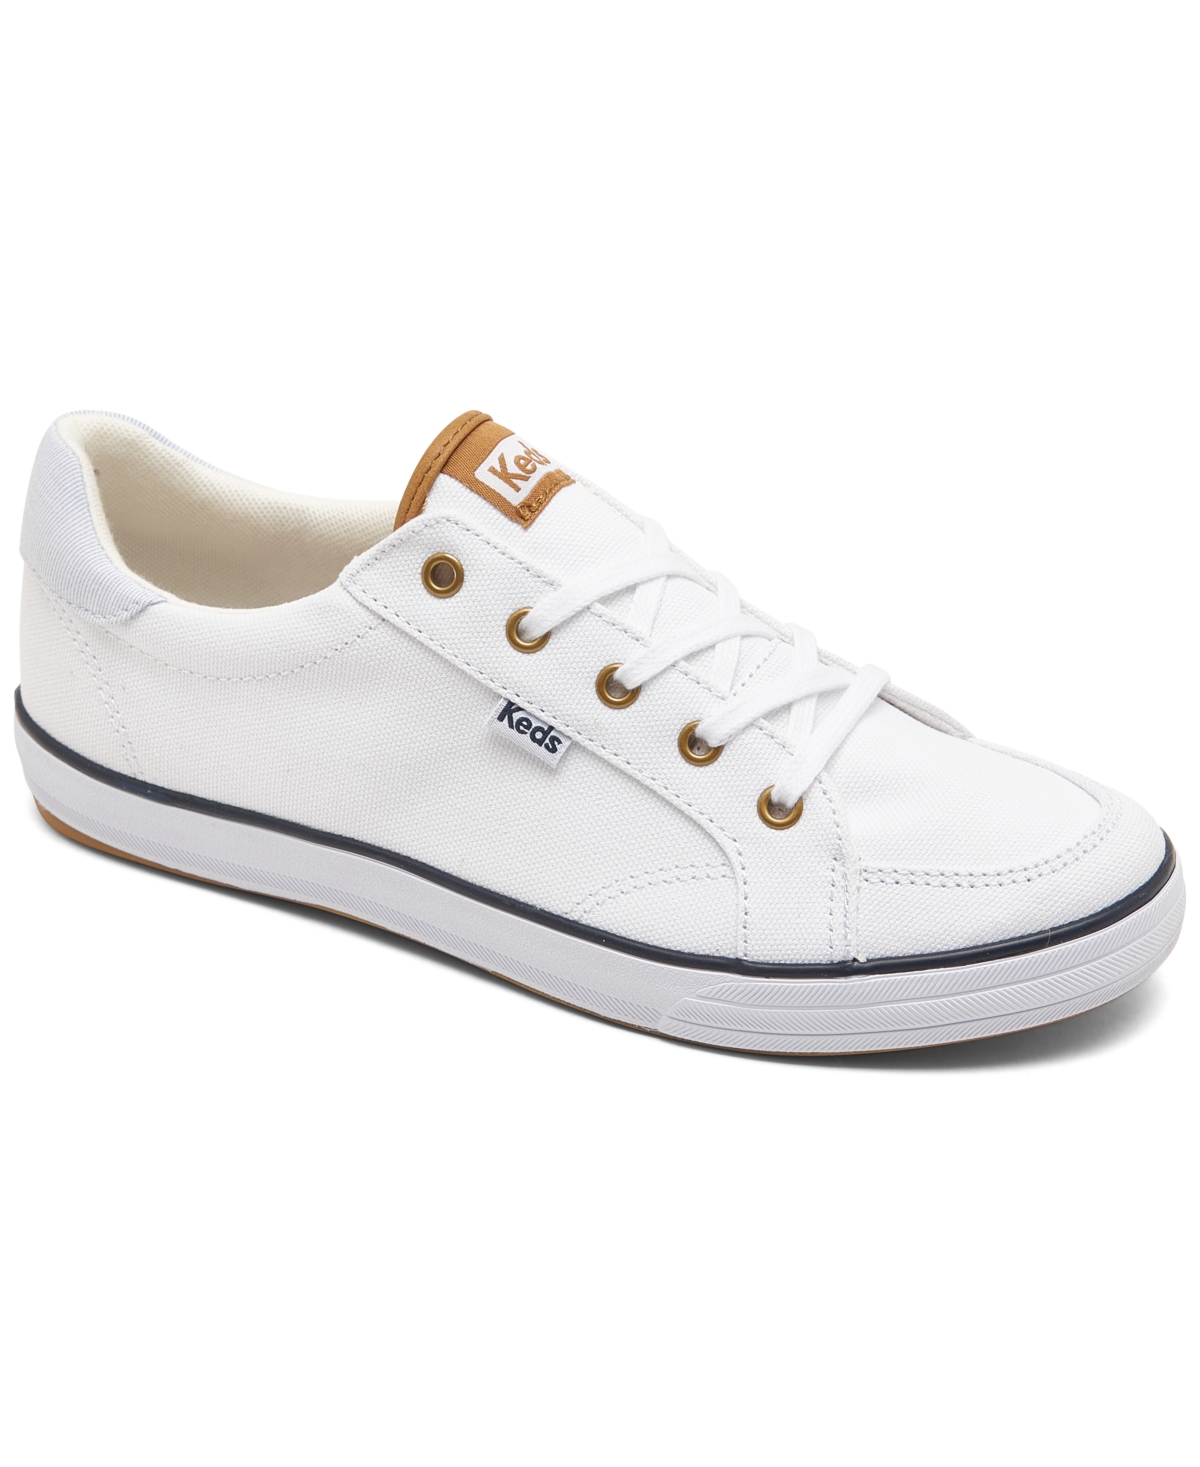 Women's Center Iii Canvas Casual Sneakers from Finish Line - White